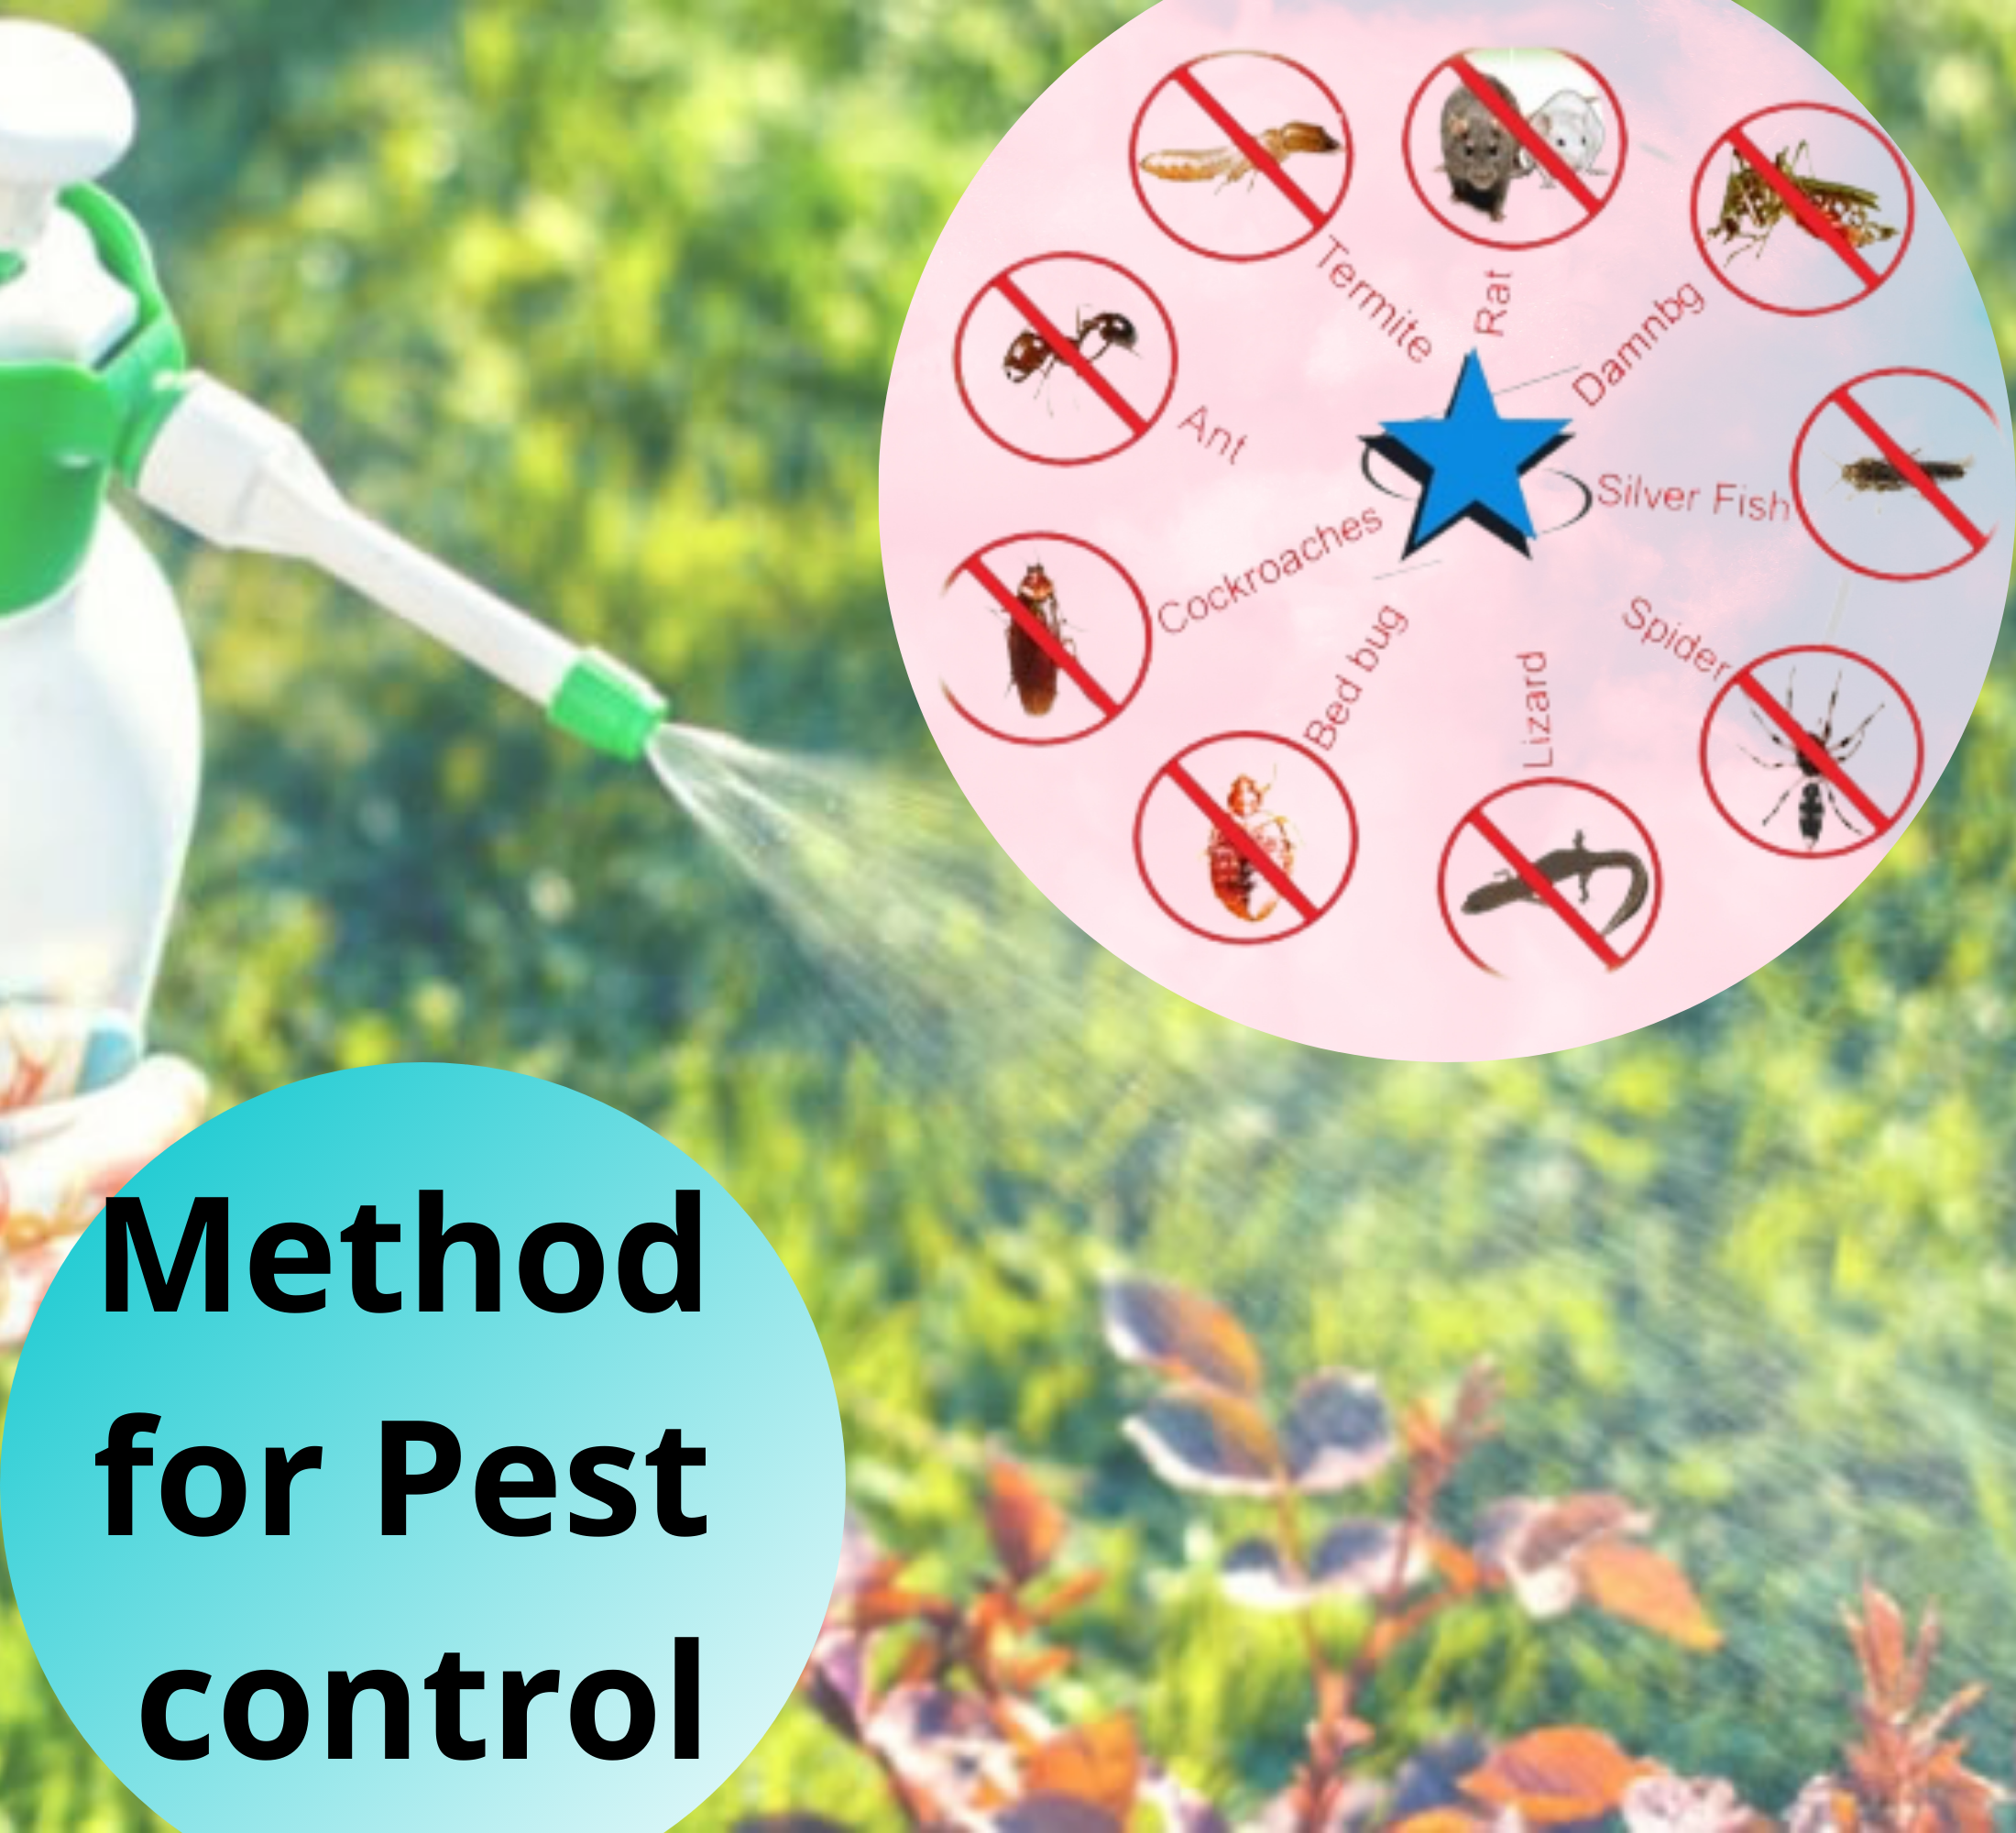 What are Some Pest Control Methods?